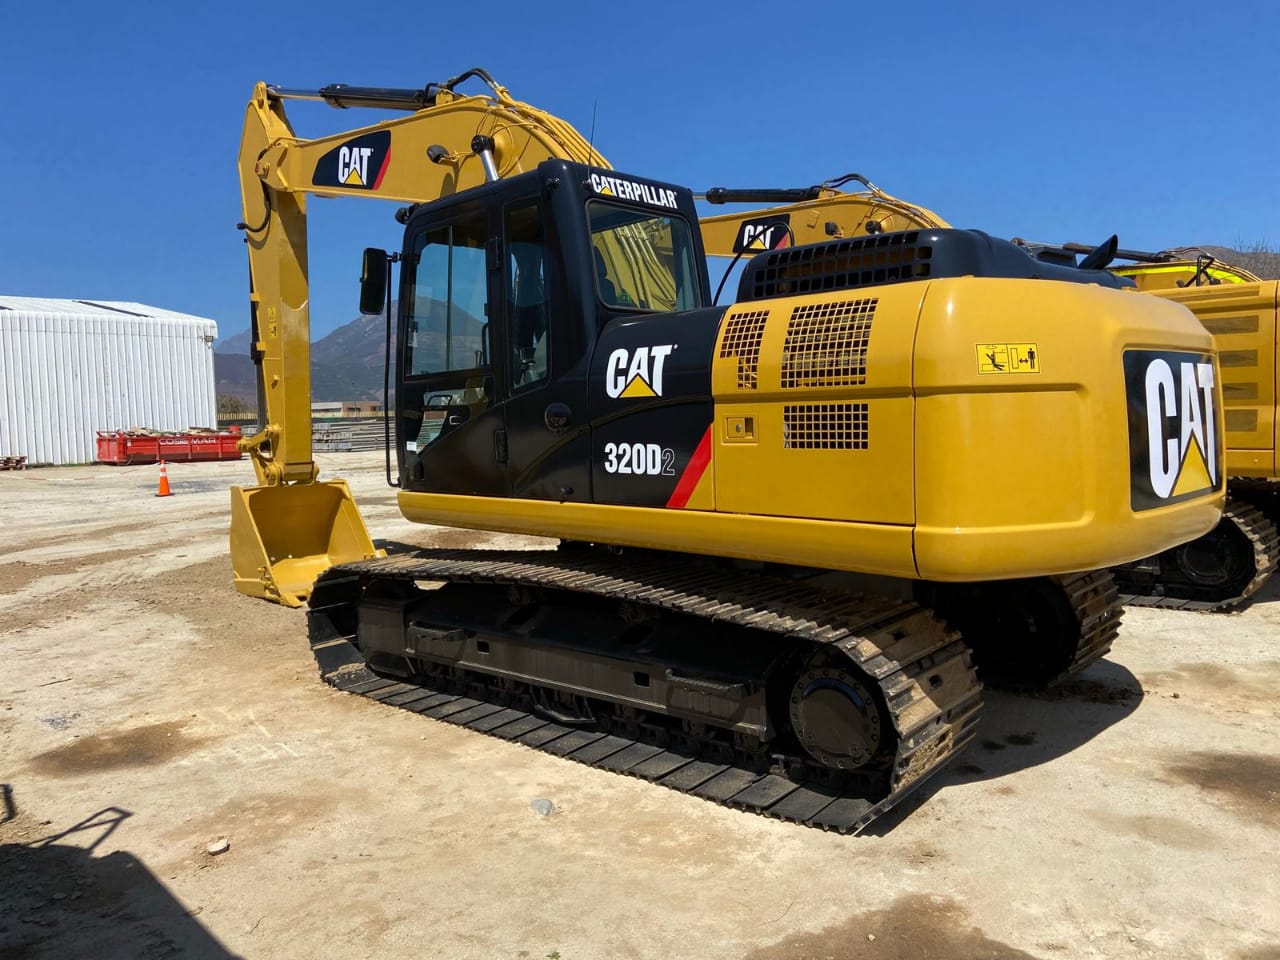 Used Cat 320D Excavator for Sale - Australia, Mexico, Ghana, Chile - Southwest Global